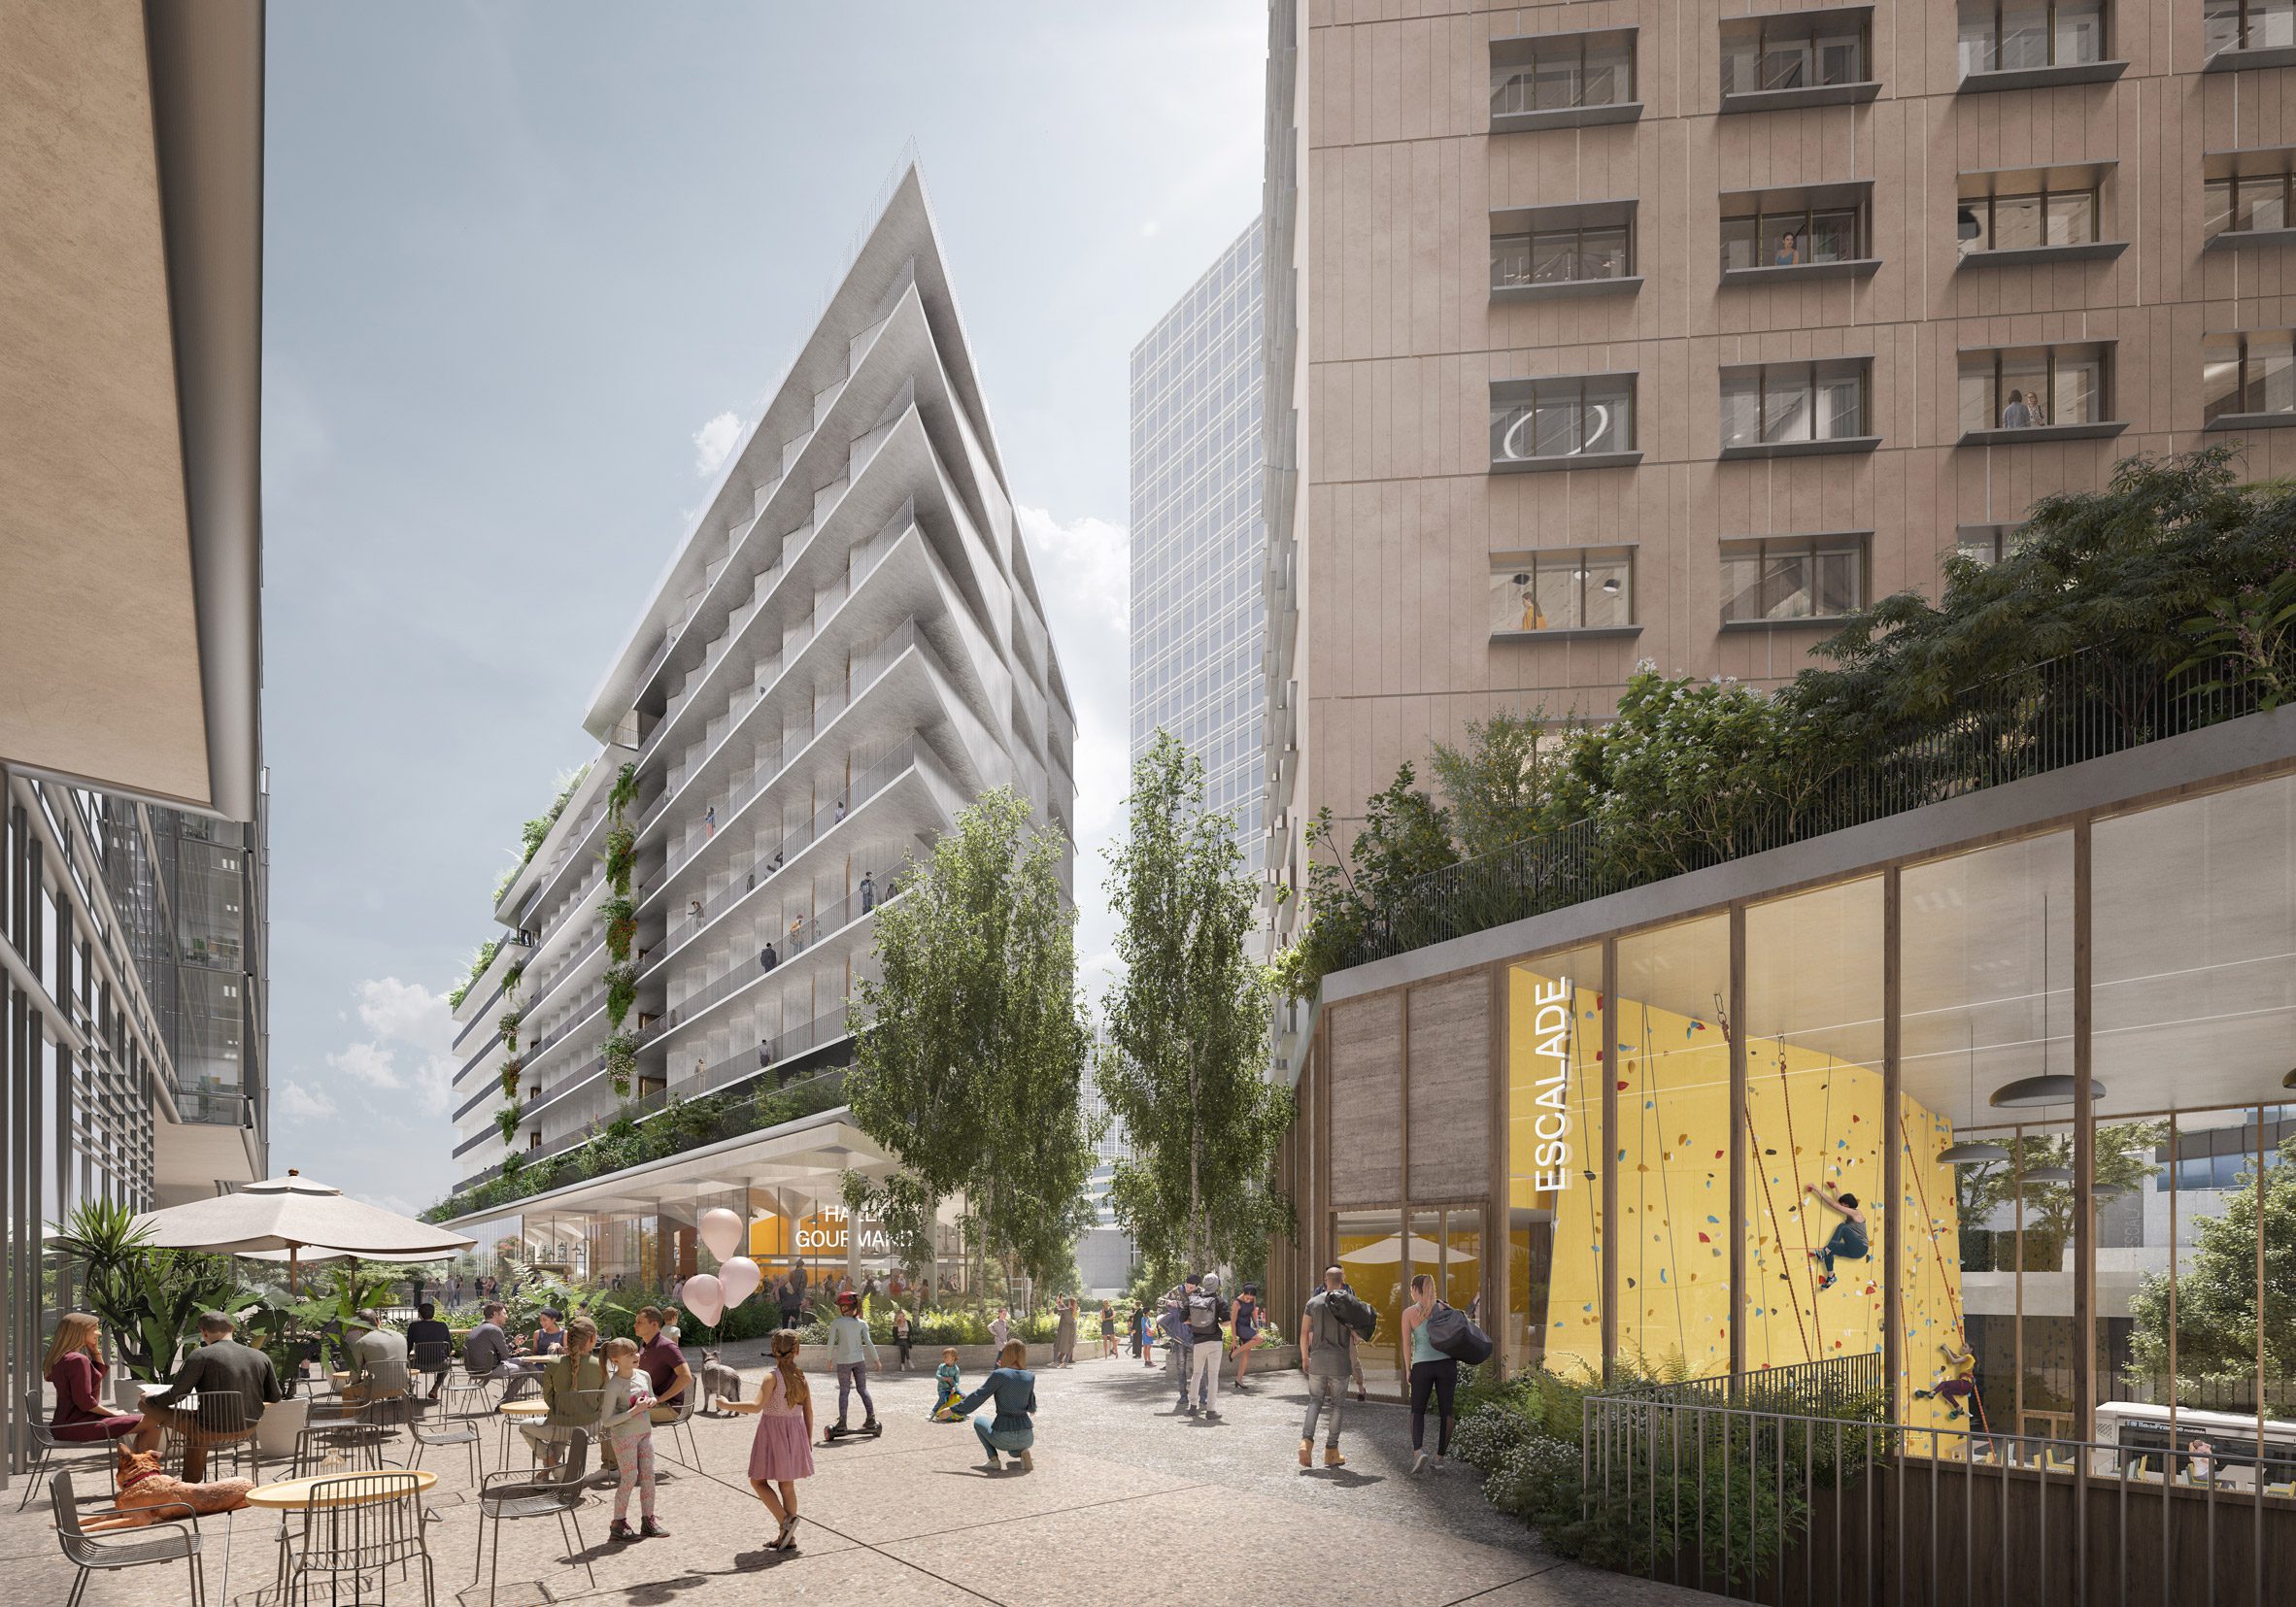 Ground floor and public space in the mixed use development in Paris business district by RSHP